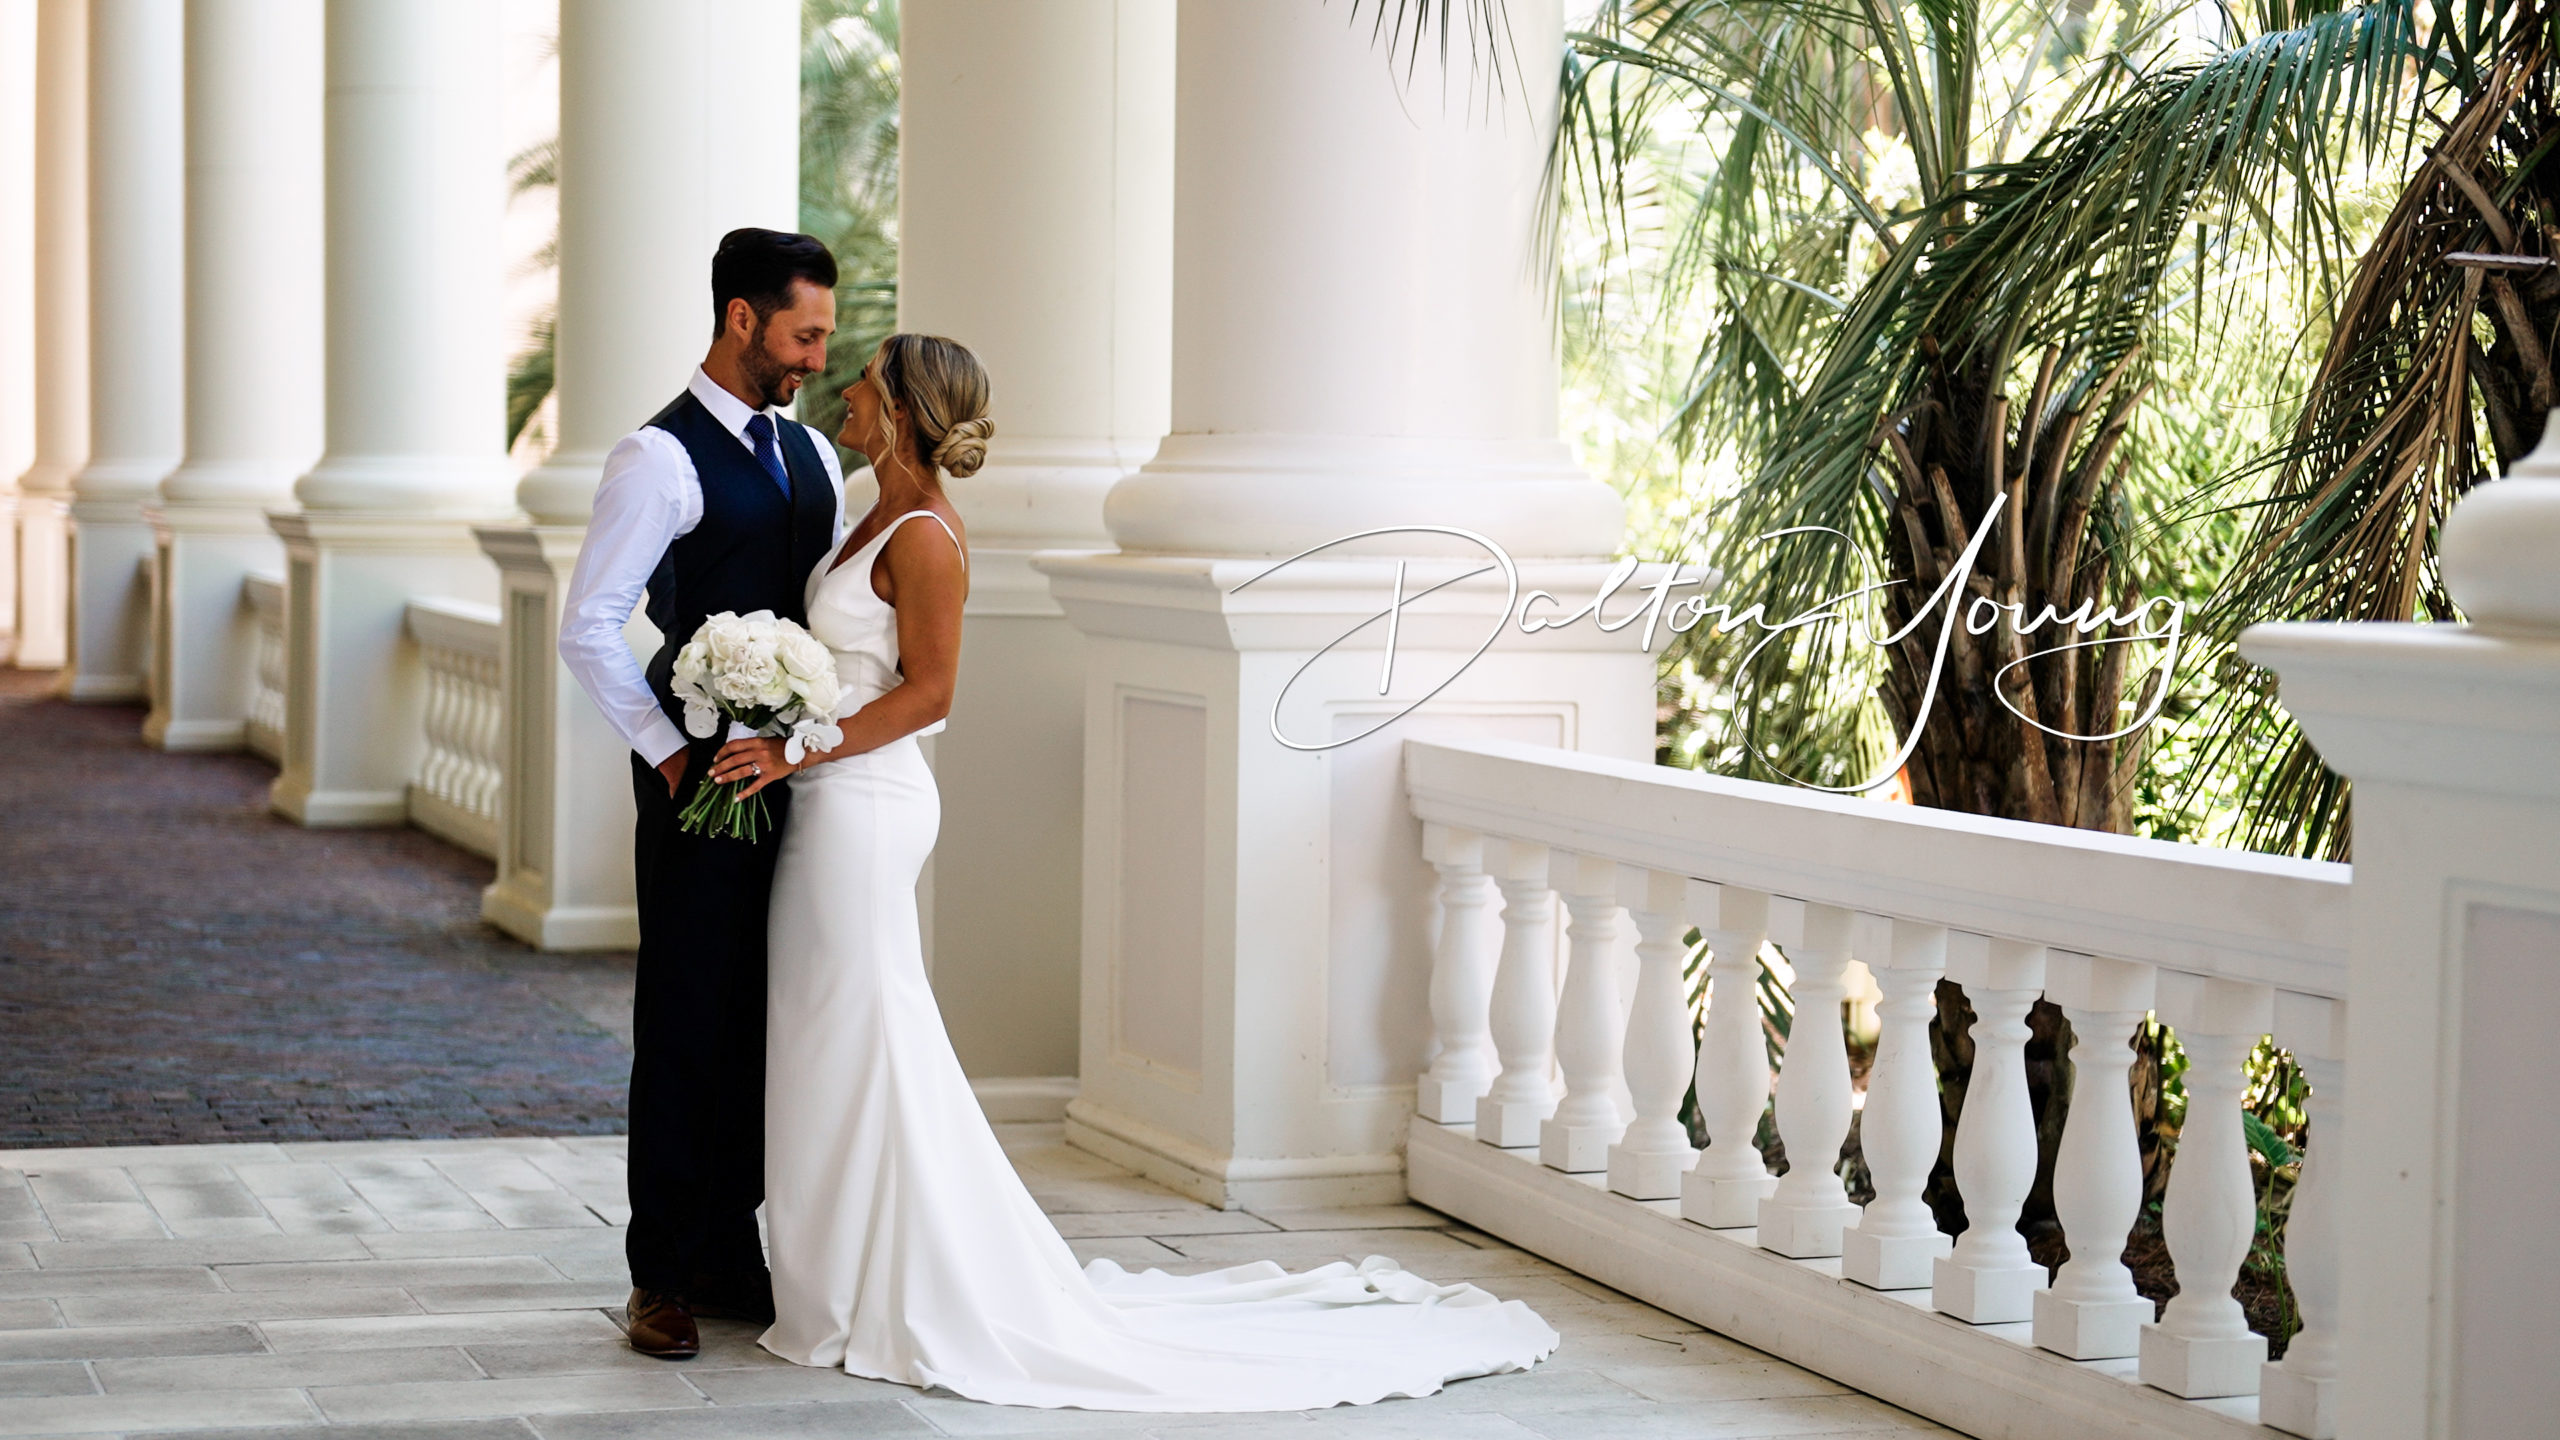 The Best 30A Wedding Venues for a Luxury Florida Wedding